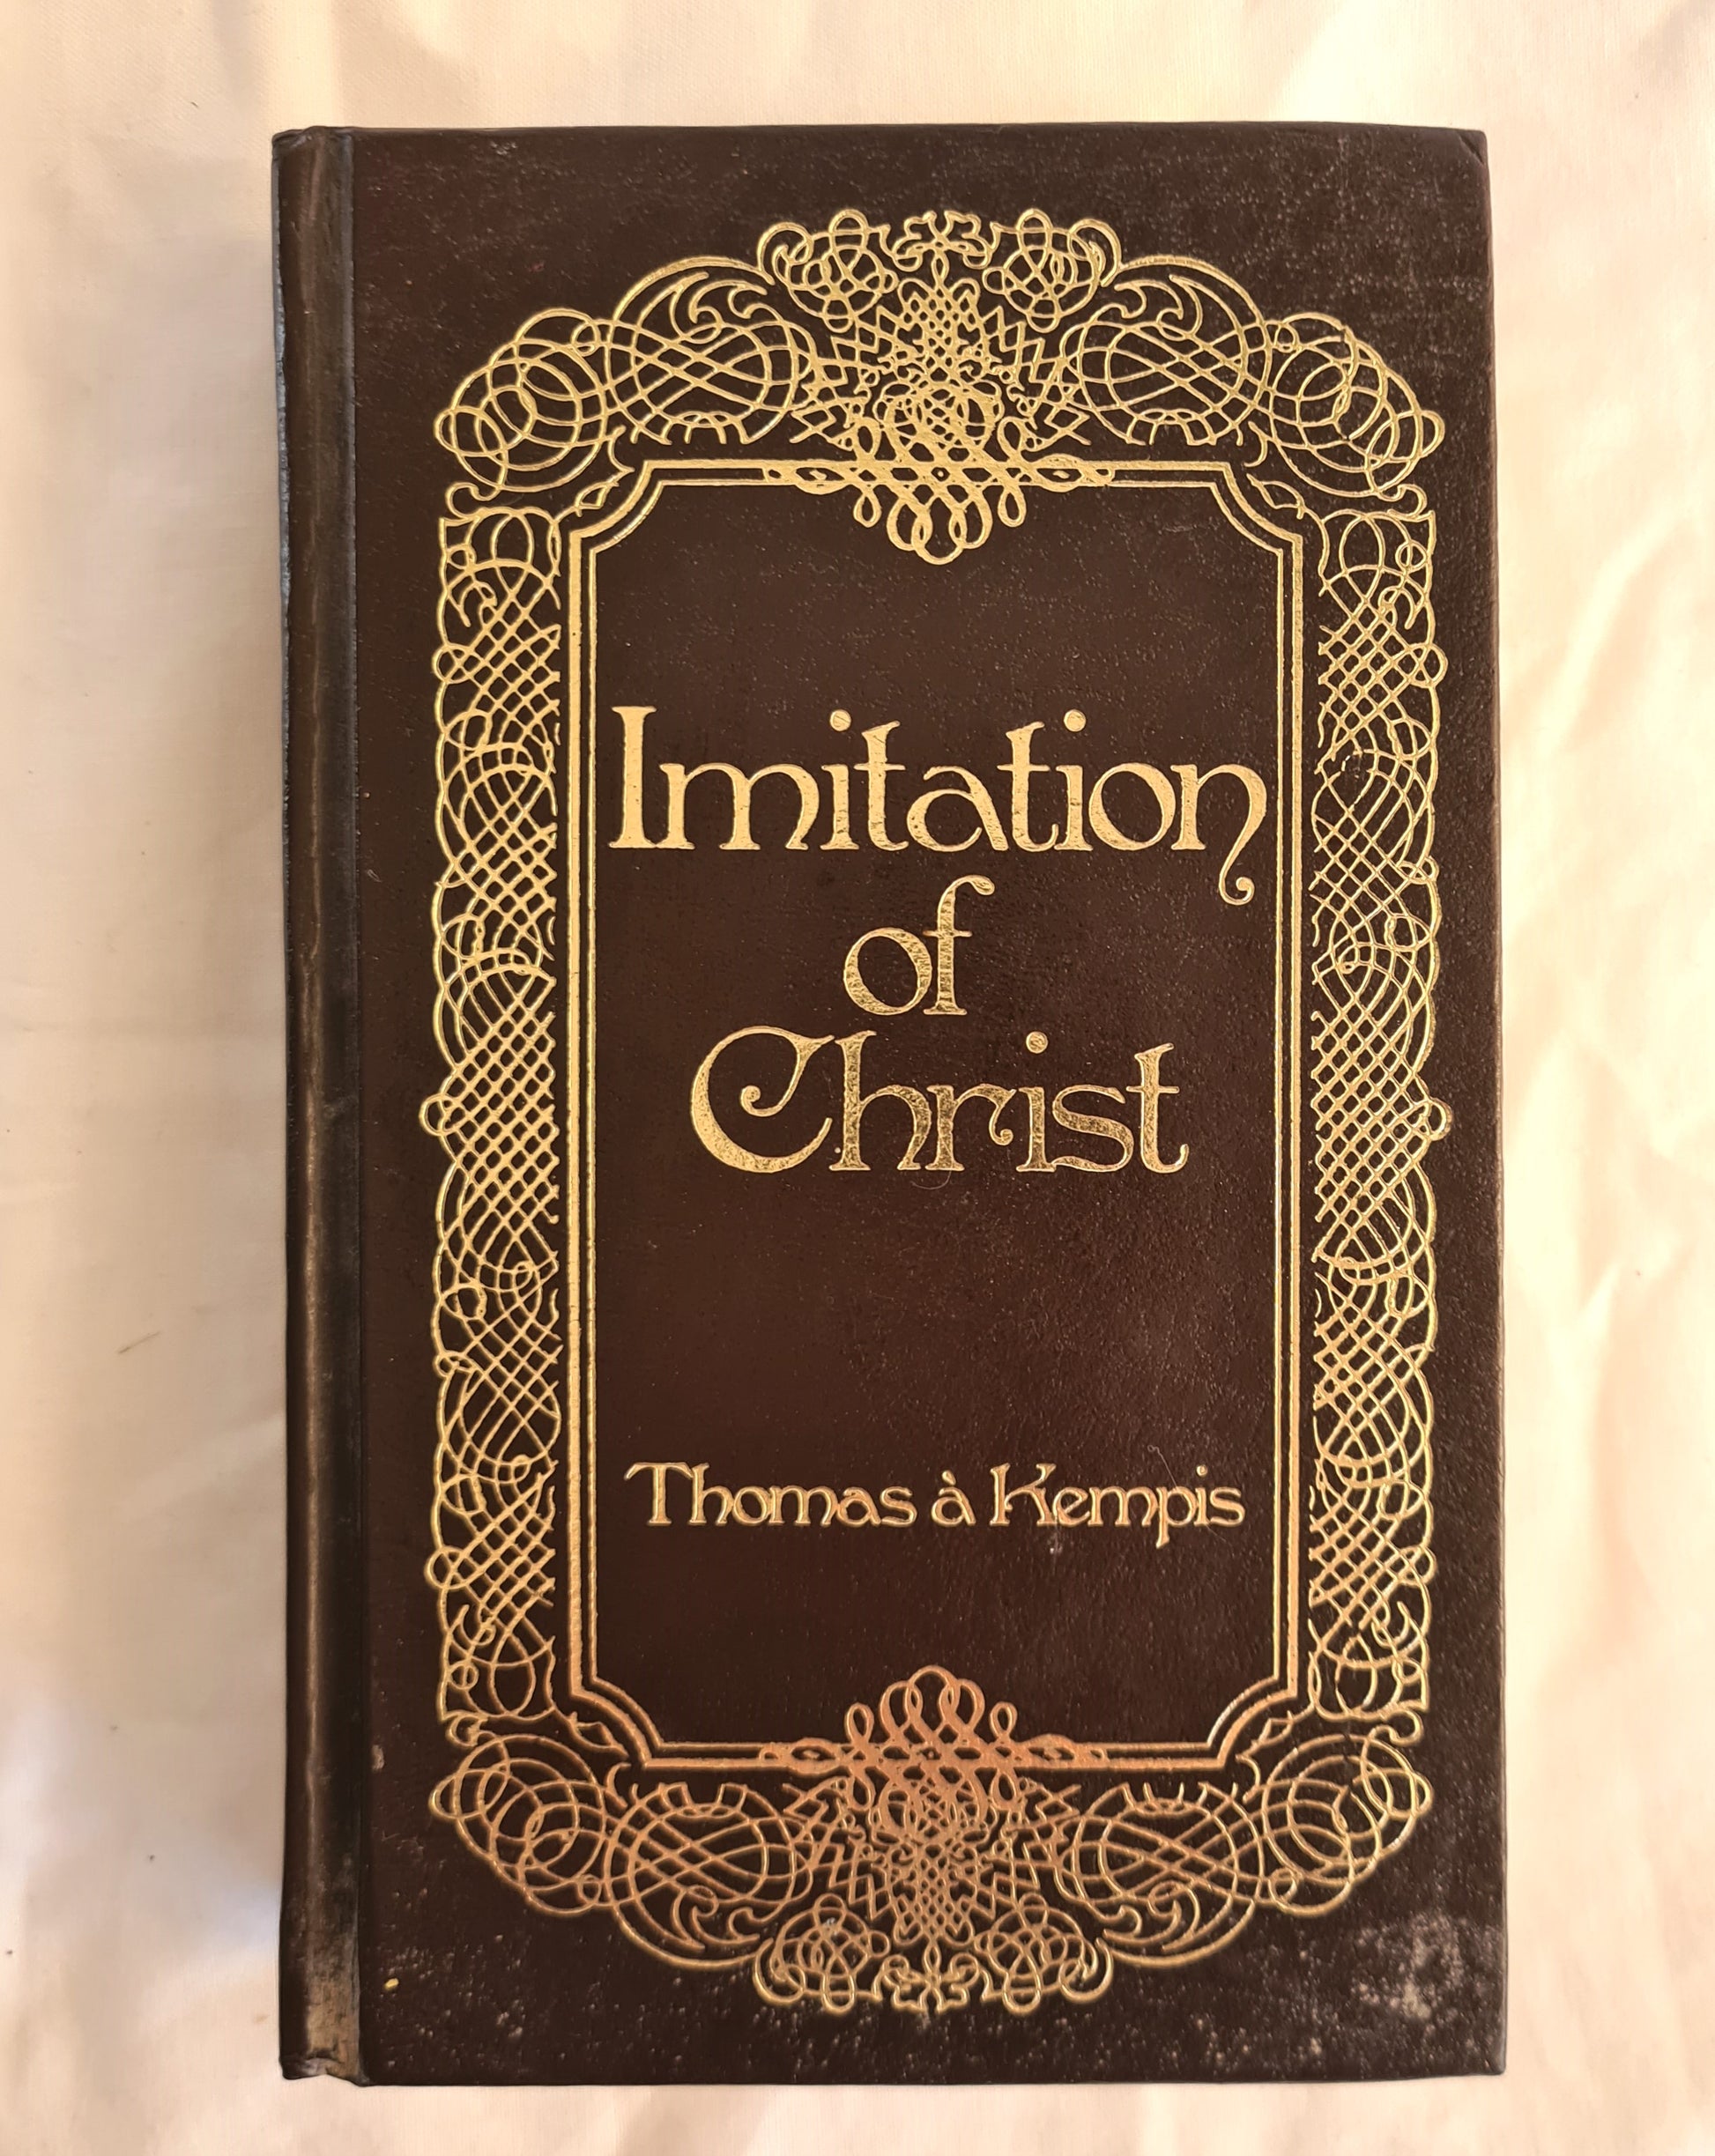 Imitation of Christ  by Thomas a Kempis  Edited by Paul M. Bechtel